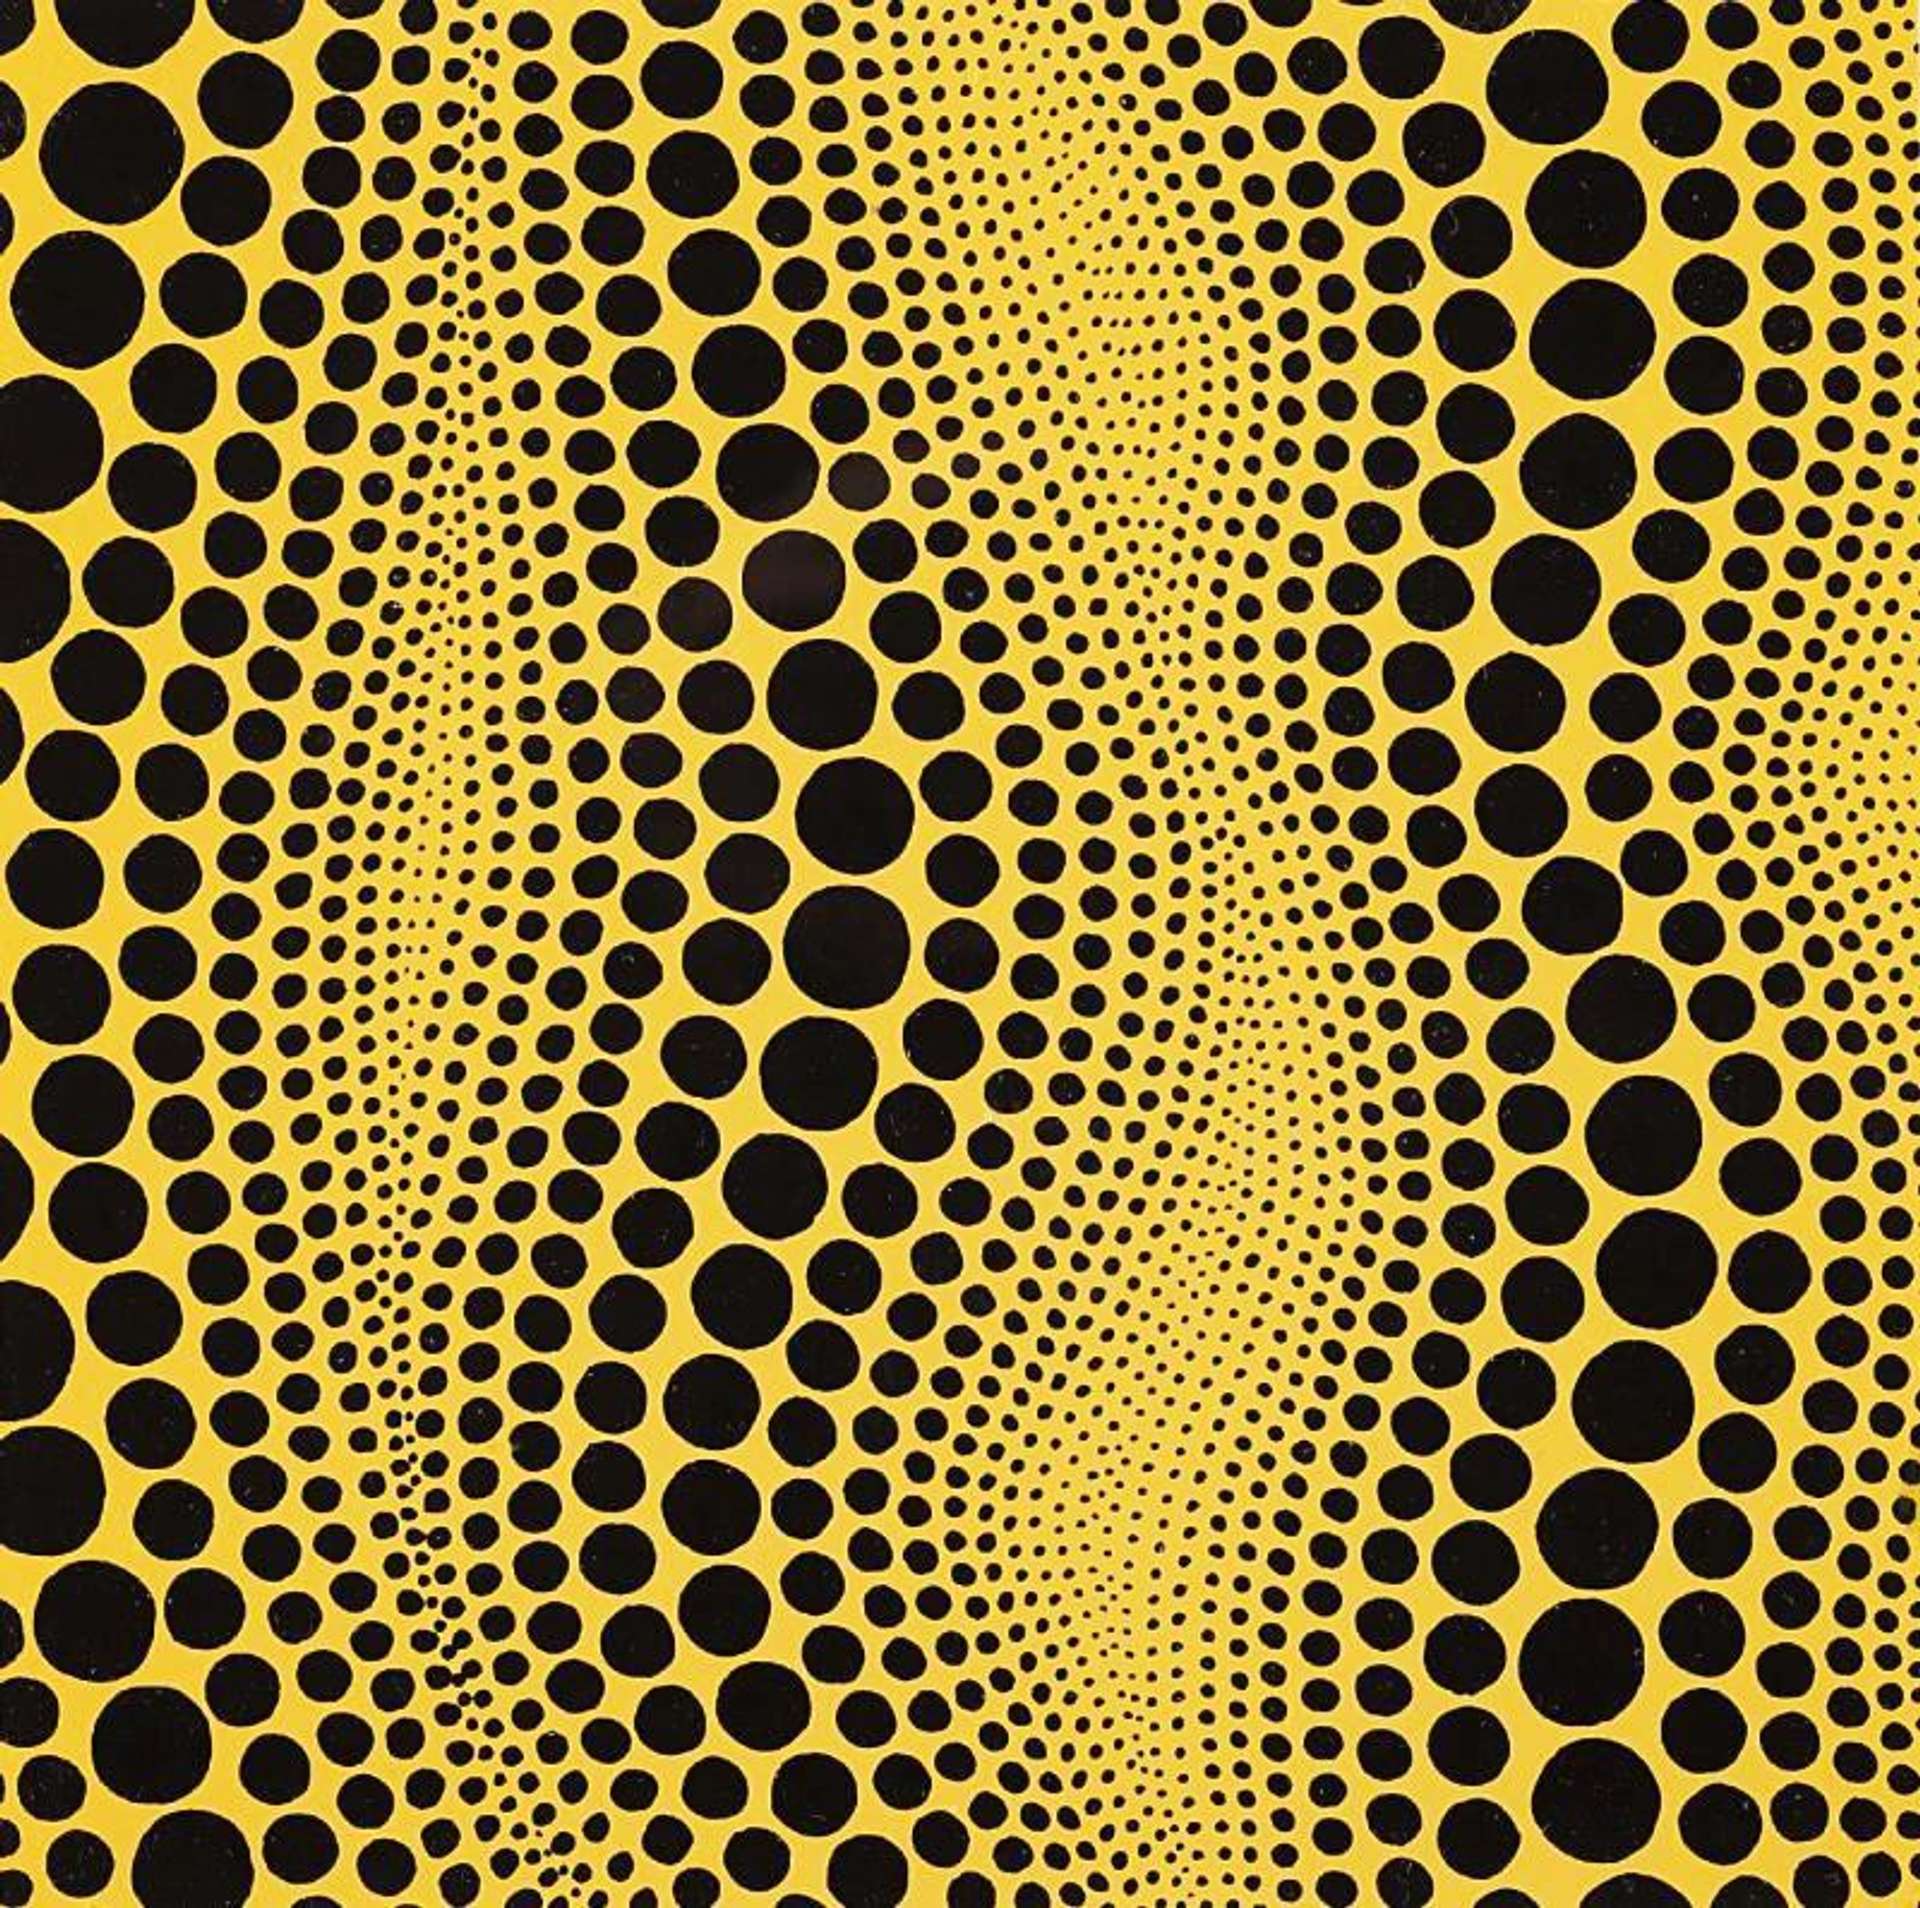 A woodcut print by Yayoi Kusama depicting a wavy pattern of black dots, in various sizes, against a yellow background